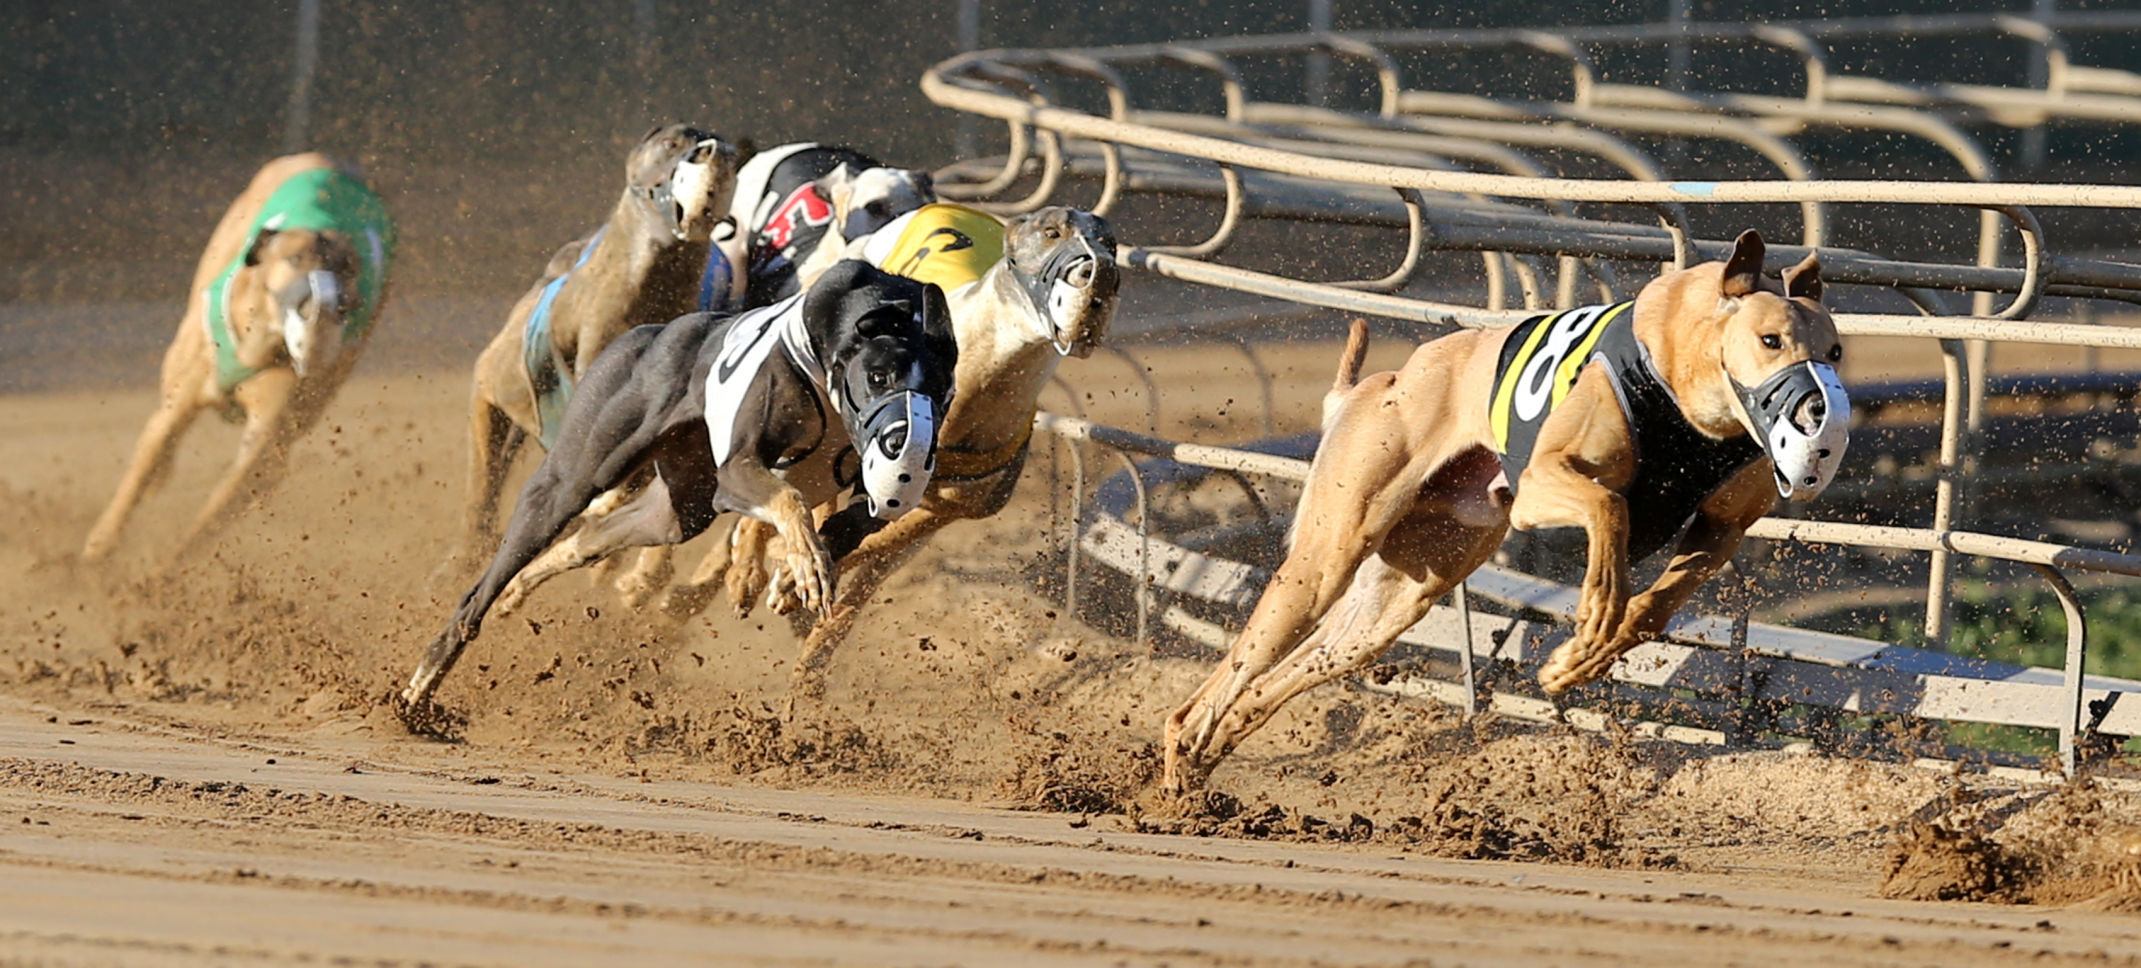 Greyhounds will race for the final time in Dubuque in 2022. The final season at Iowa Greyhound Park will last for only a month, beginning April 16 and concluding on May 15. There will be a total of 18 race days, each with 10 races on the schedule.    PHOTO CREDIT: JESSICA REILLY